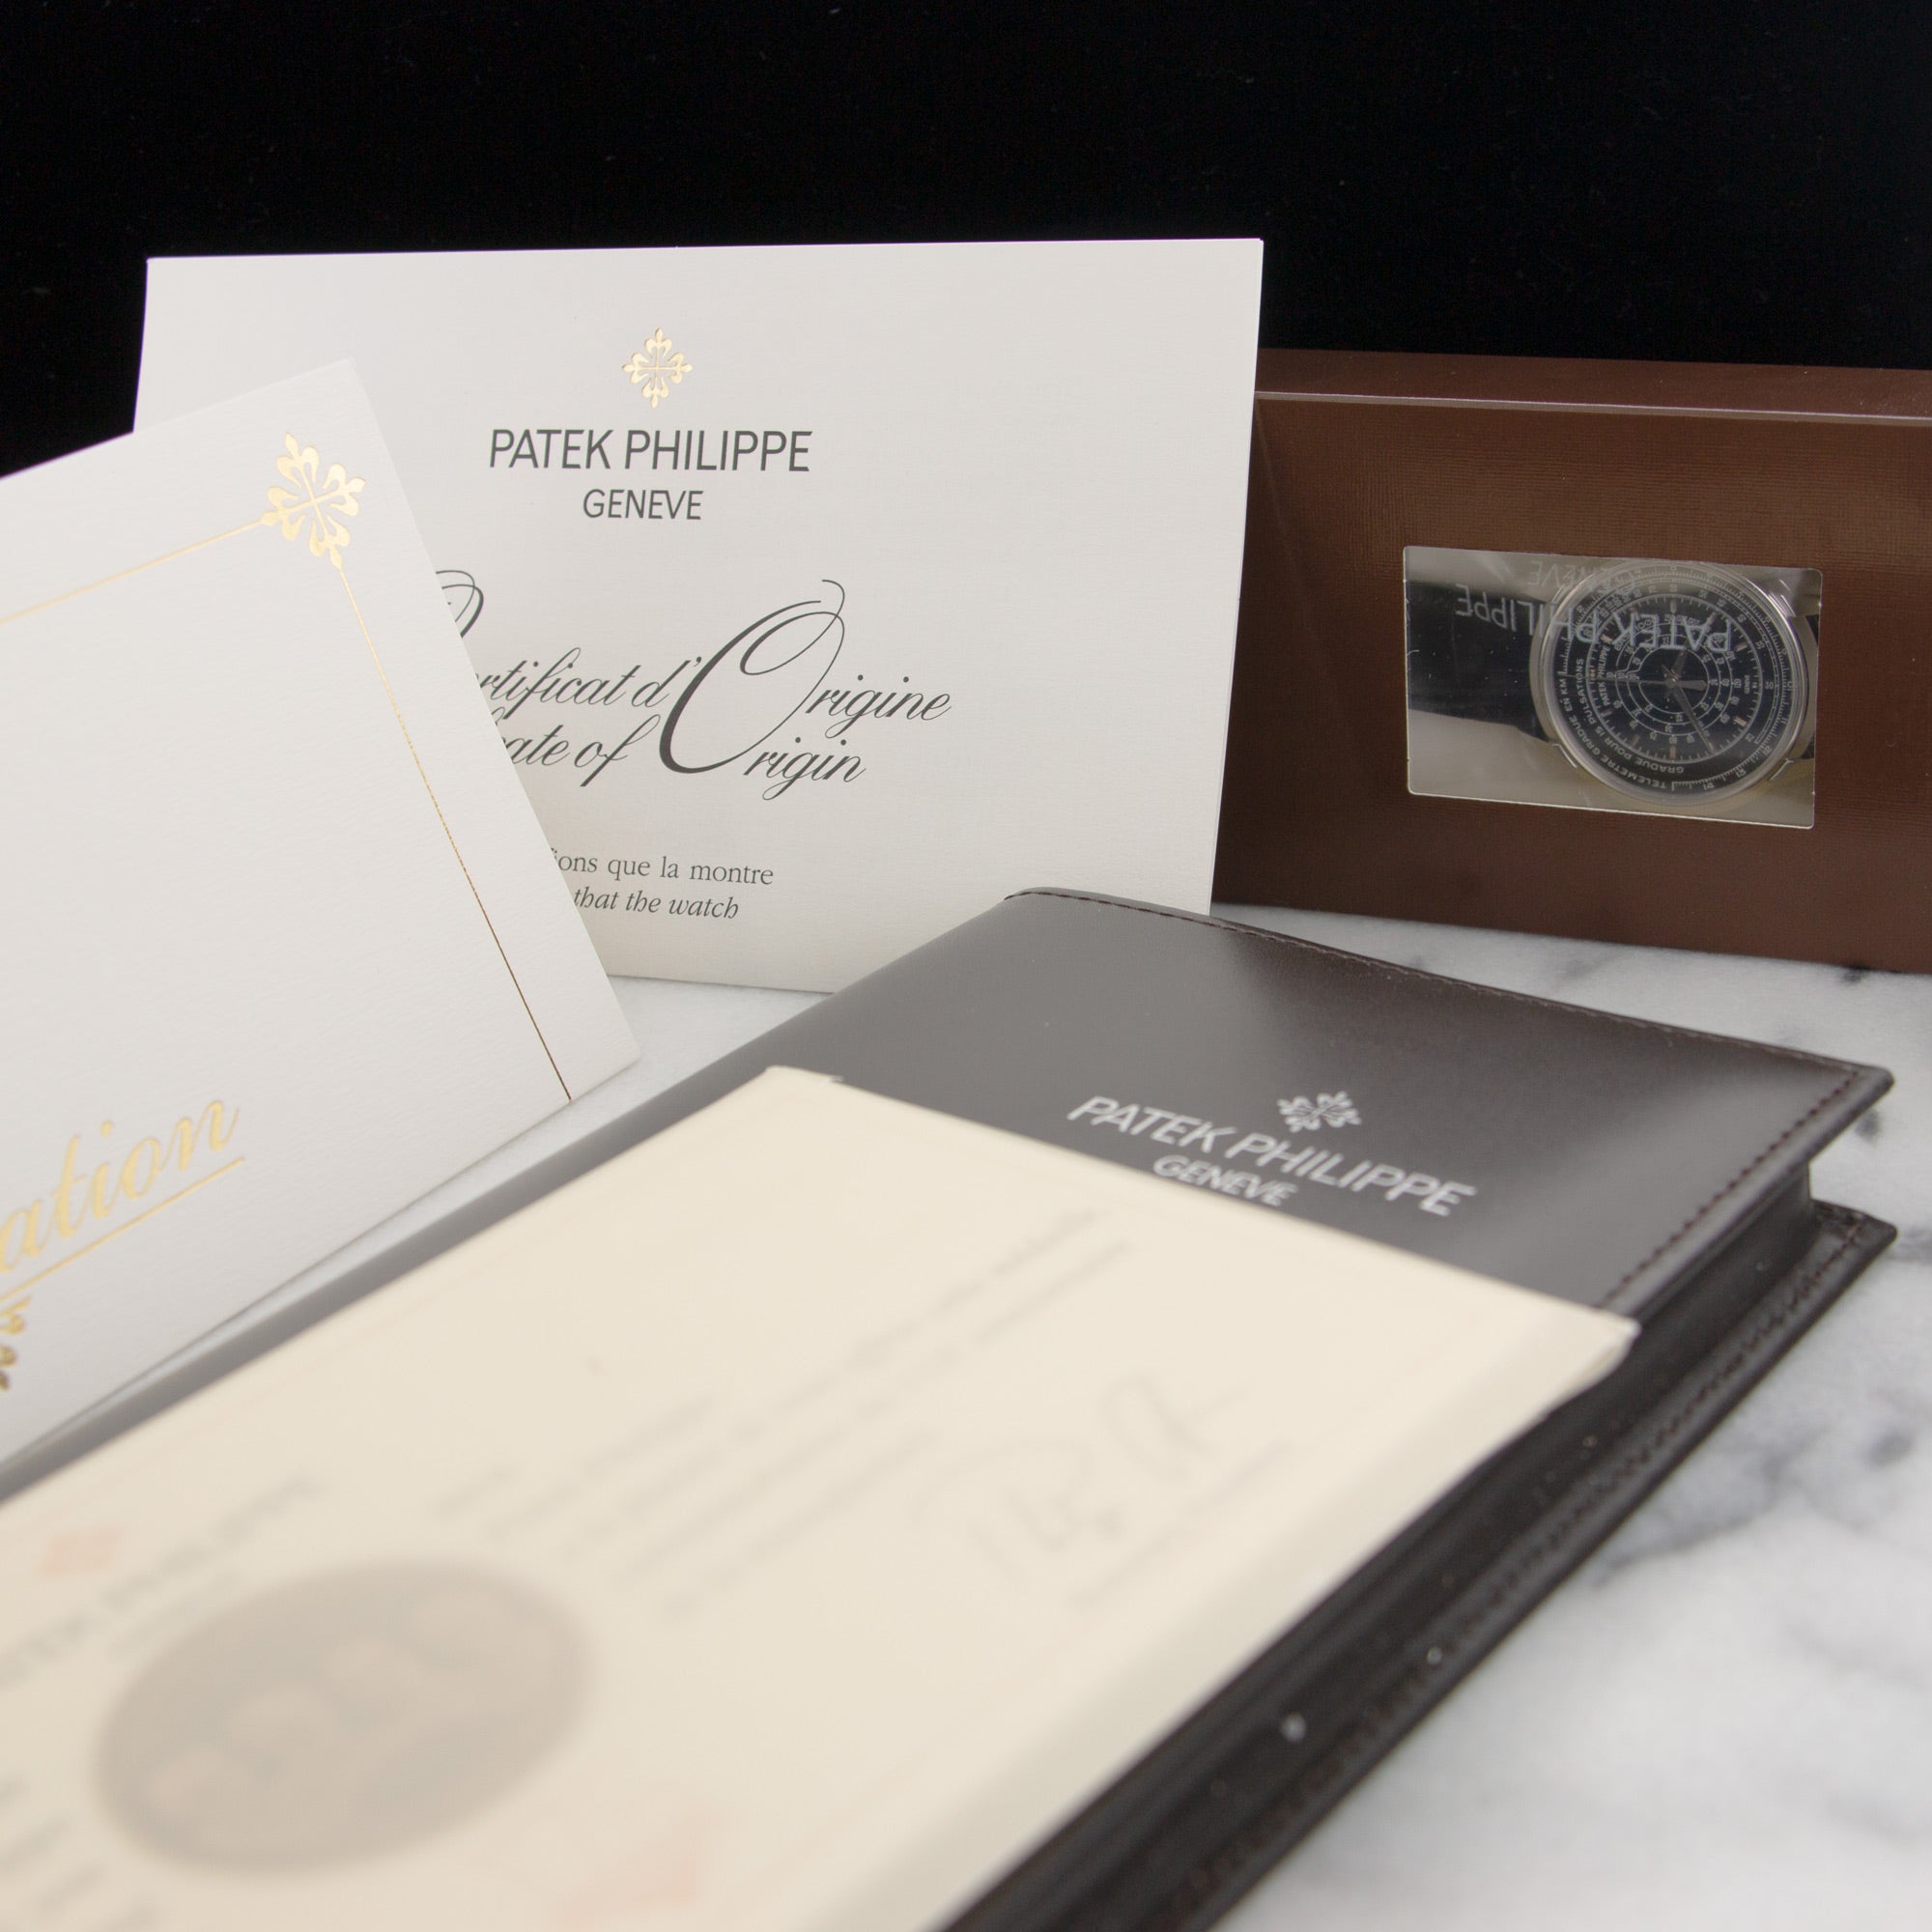 Patek Philippe - Patek Philippe Platinum Chronograph 175th Anniversary Watch Ref. 5975 in Double Sealed Condition - The Keystone Watches